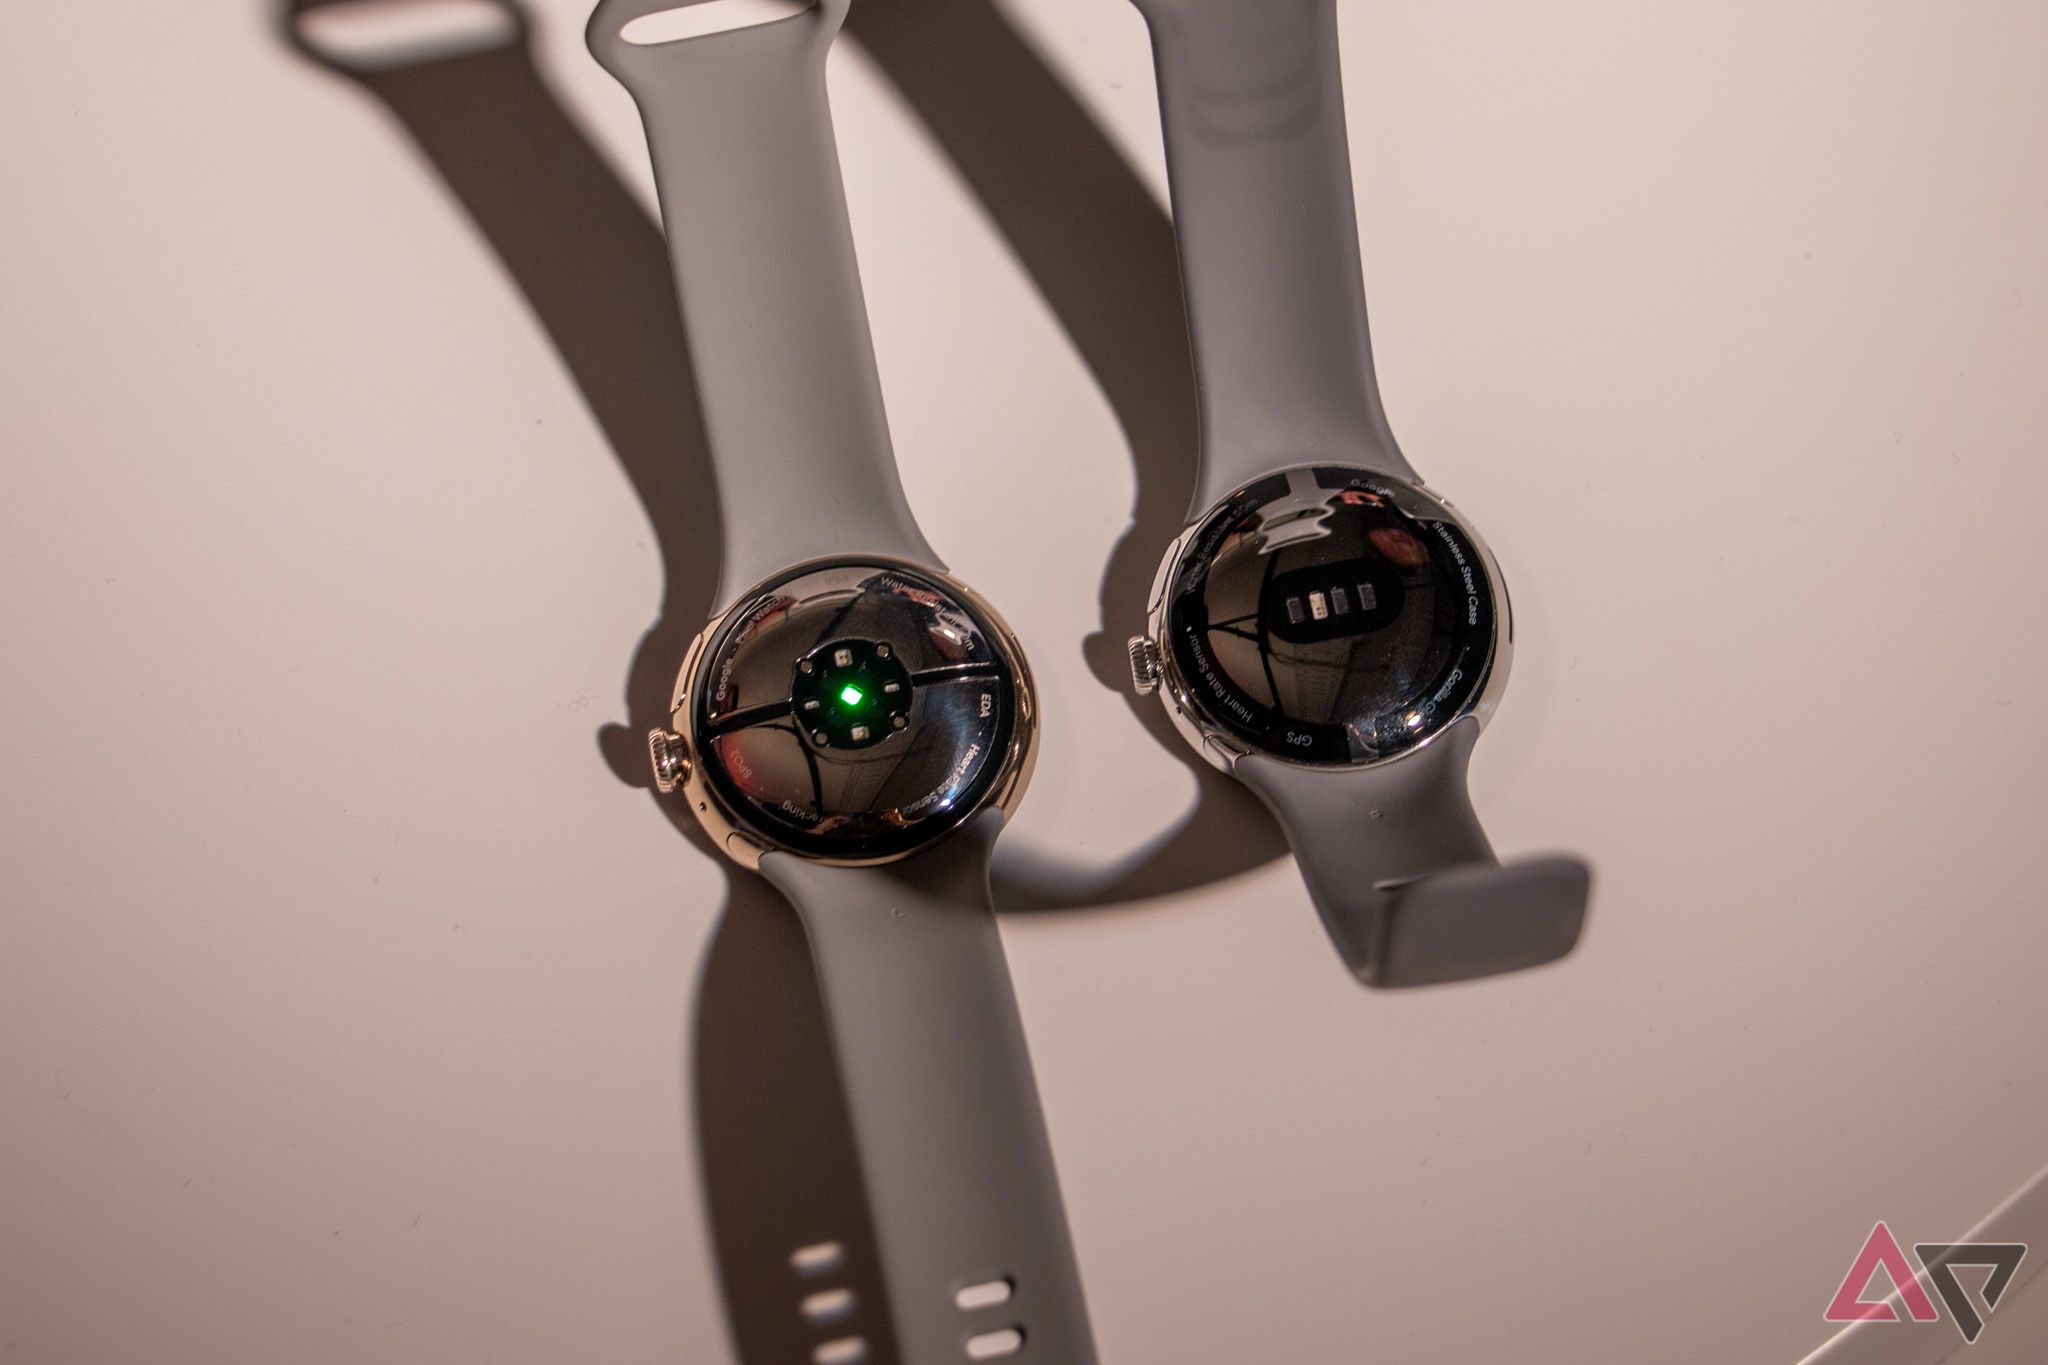 Pixel Watch vs Pixel Watch 2: What's new and should you upgrade?